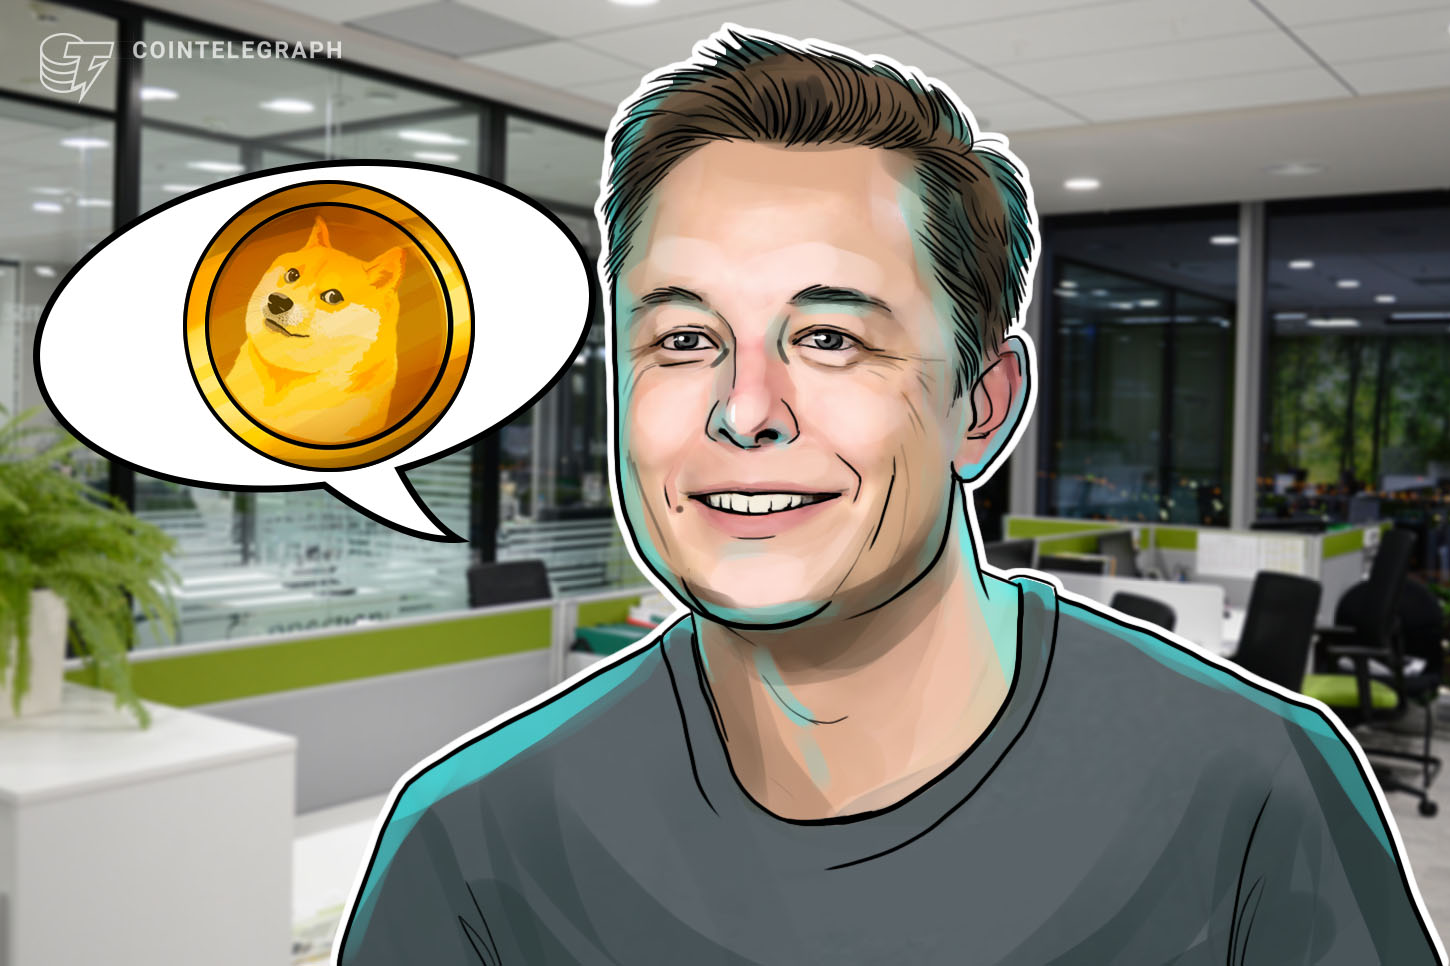 Why Dogecoin instantly surged 25% after Elon Musk tweeted about it